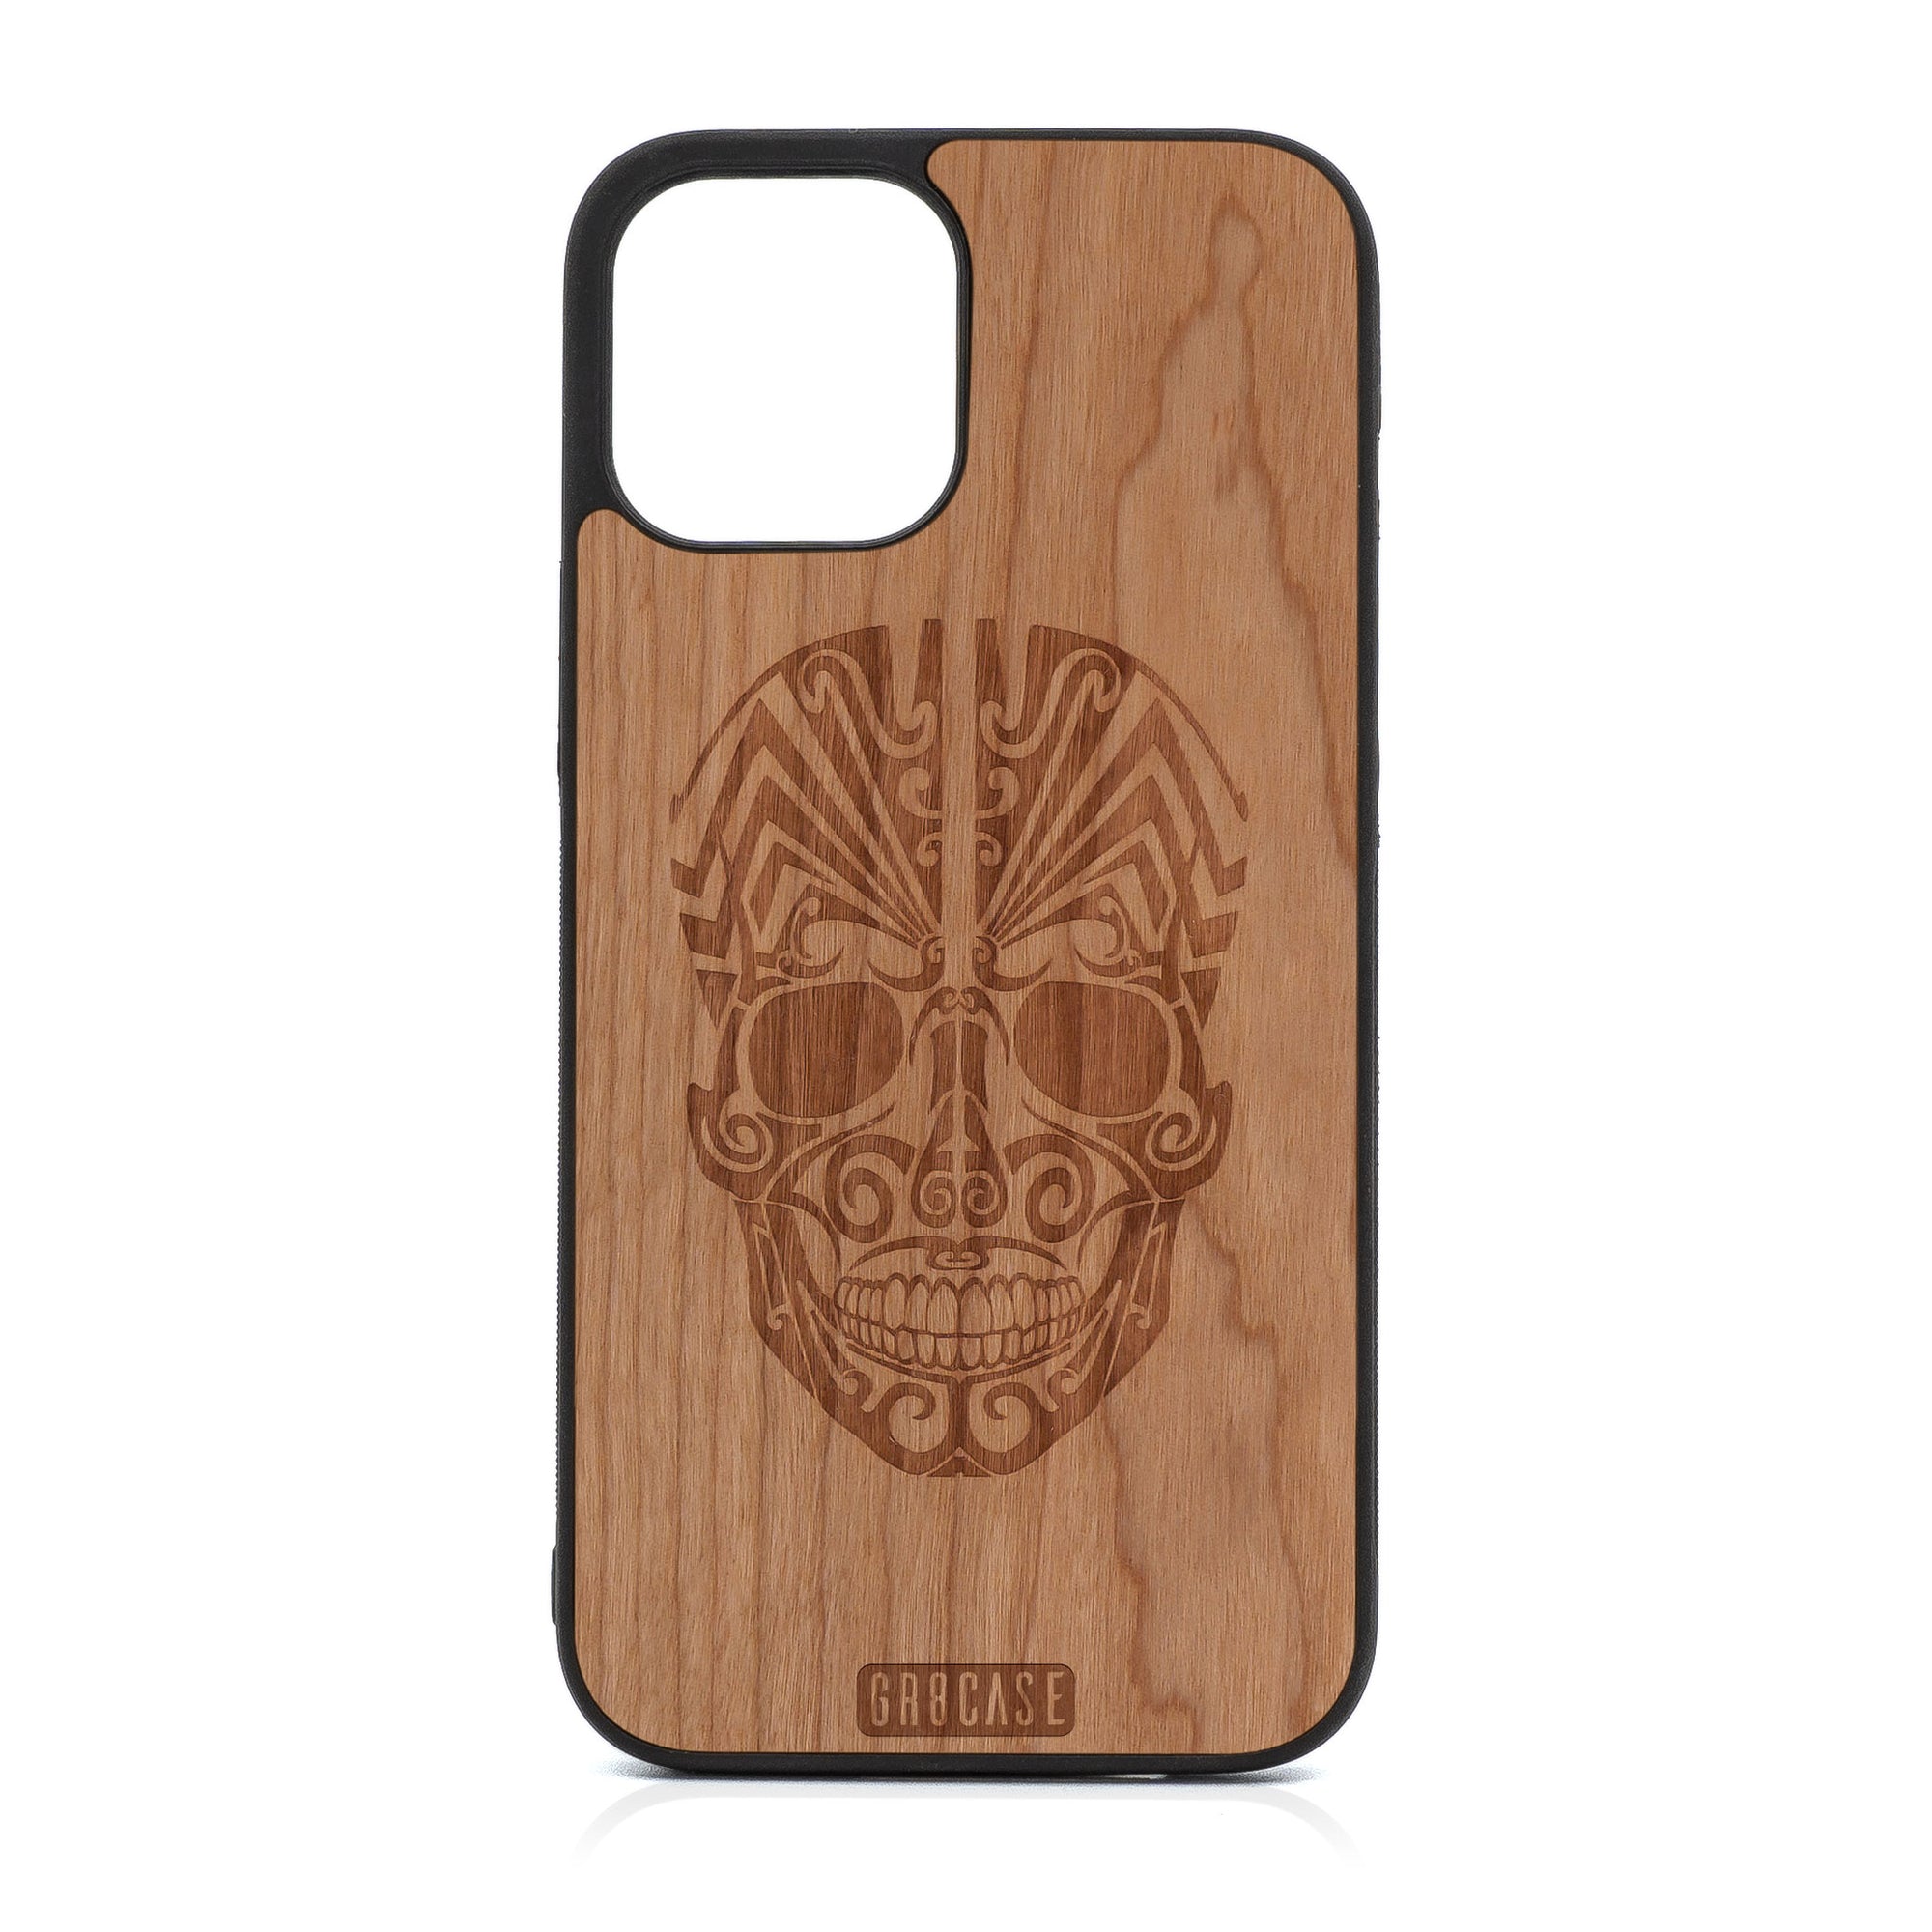 Tattoo Skull Design Wood Case For iPhone 12 Pro Max